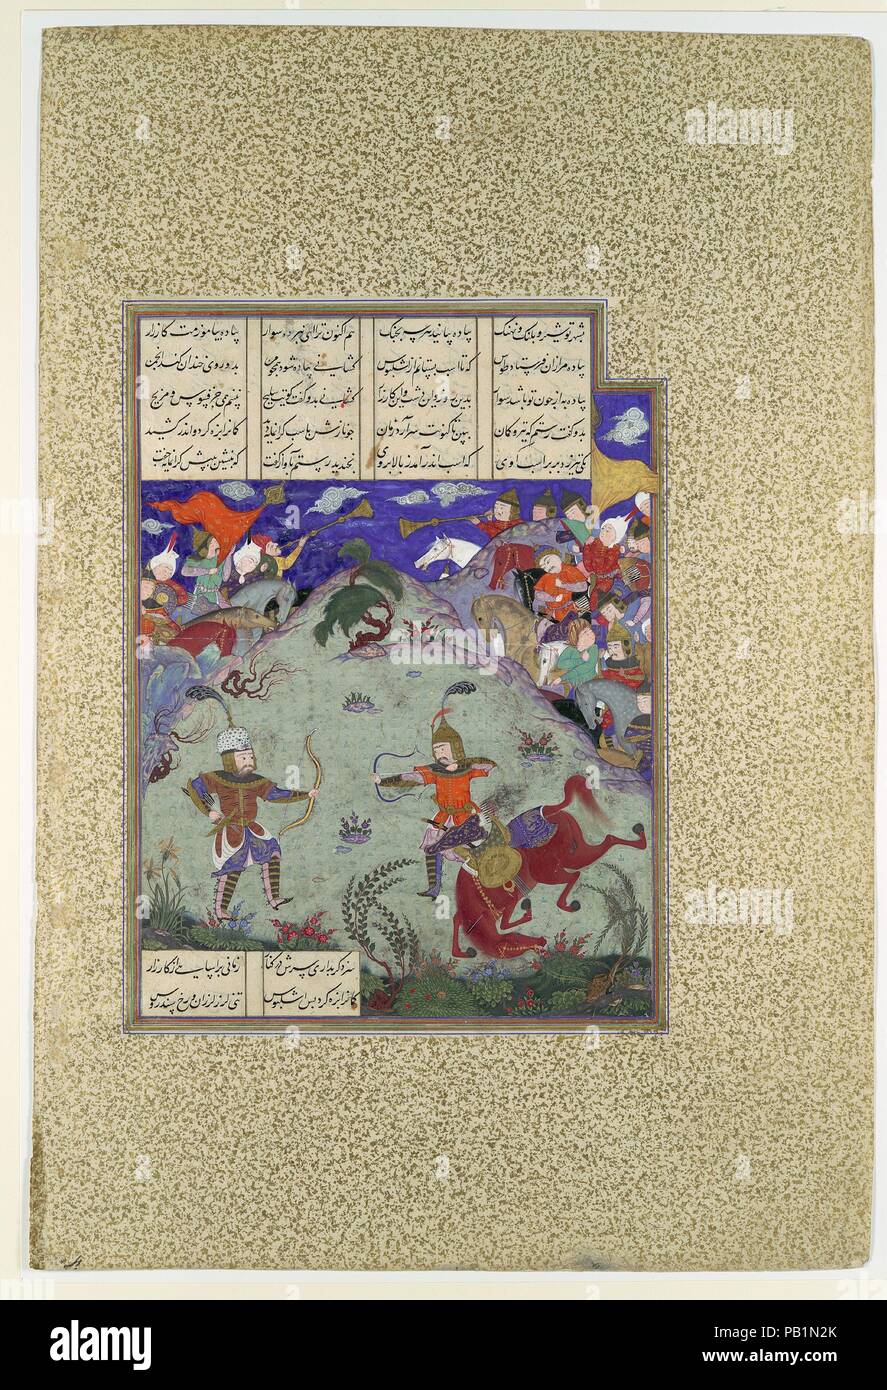 'The Combat of Rustam and Ashkabus', Folio 268v from the Shahnama (Book of Kings) of Shah Tahmasp. Artist: Painting attributed to Mirza Muhammad Qabahat. Author: Abu'l Qasim Firdausi (935-1020). Dimensions: Painting: H. 9 3/8 x W. 7 5/8 in. (H. 23.8 x W. 19.4 cm)  Entire Page: H. 18 5/8 x W. 12 5/8 in. (H. 47.3 x W. 32.1 cm). Workshop director: 'Abd al-'Aziz (active first half 16th century). Date: ca. 1525-30.  With daylight the battle resumes. Before the armies can clash, Ashkabus rides out from the Turanian side and starts to abuse the Iranians. After Ruhham tries unsuccessfully to shoot Ash Stock Photo